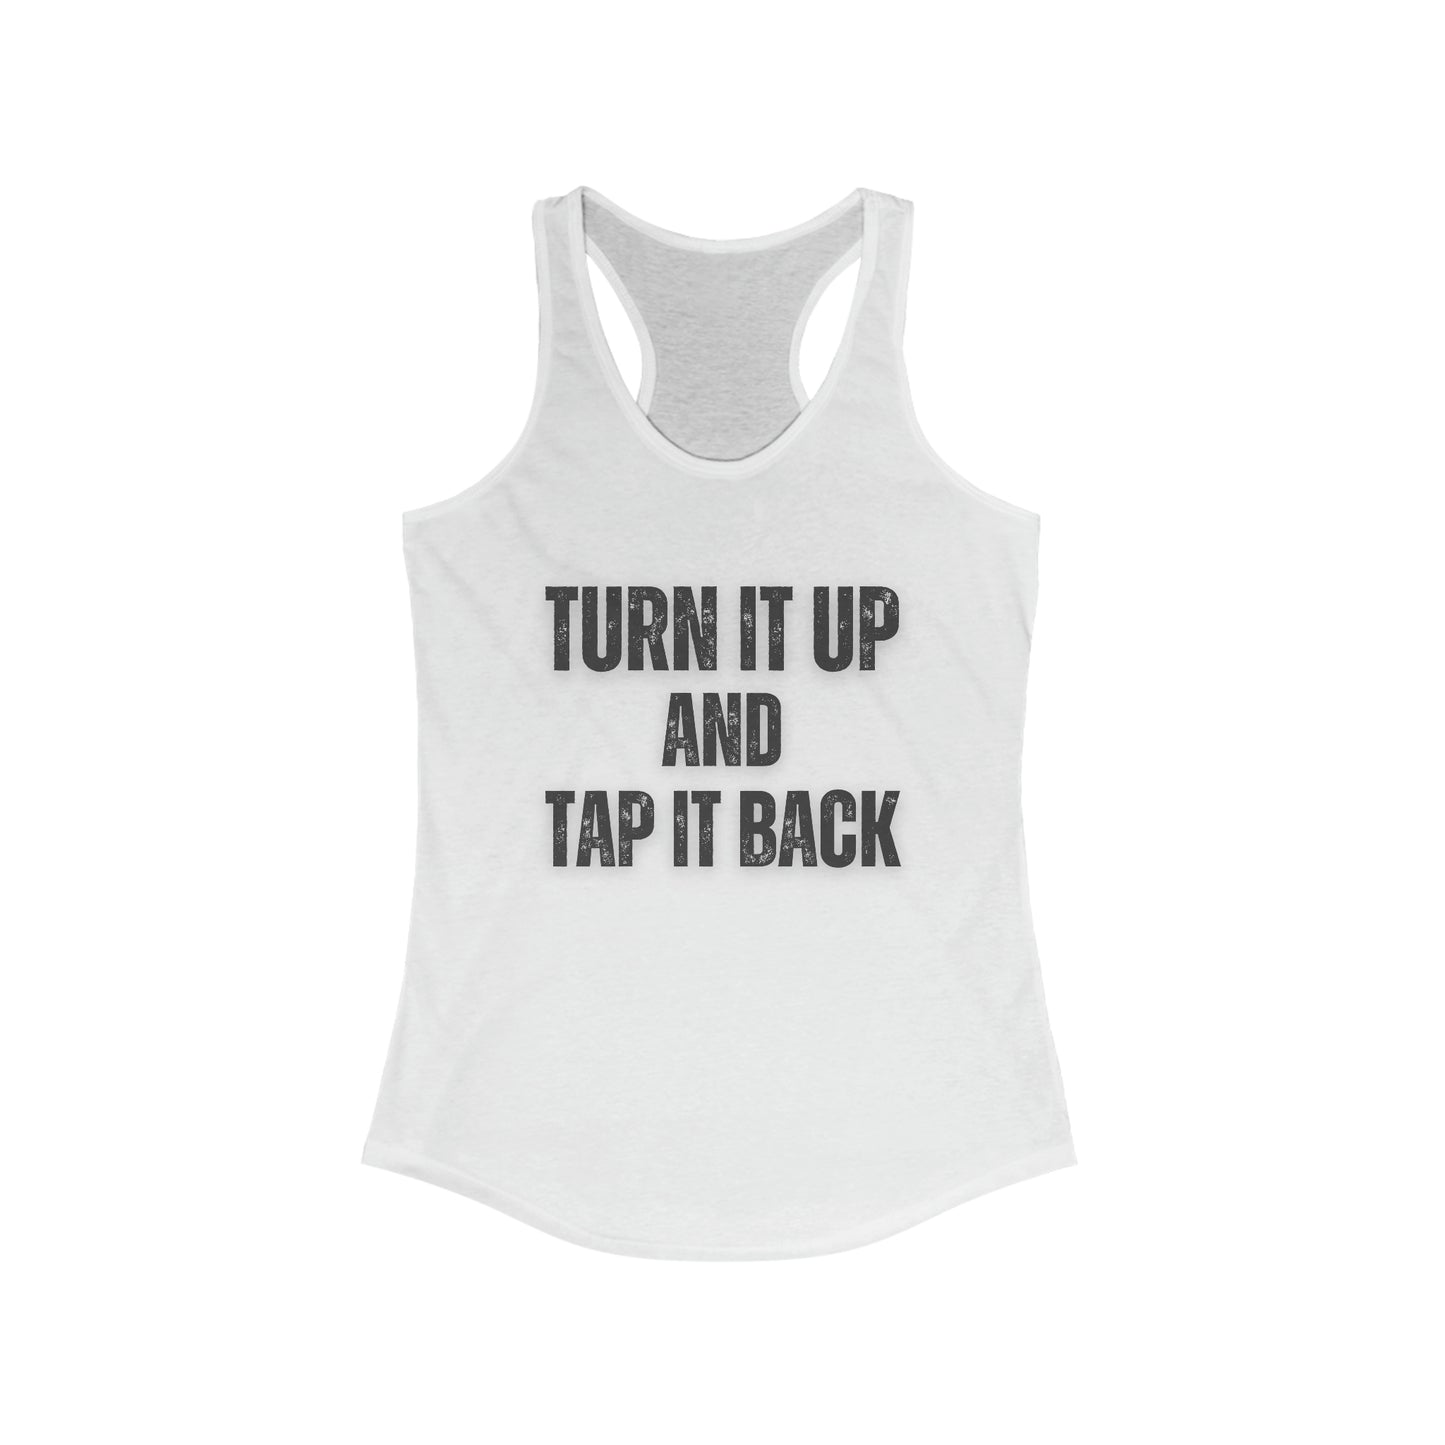 Turn it and tap it back Women's cycling tank top